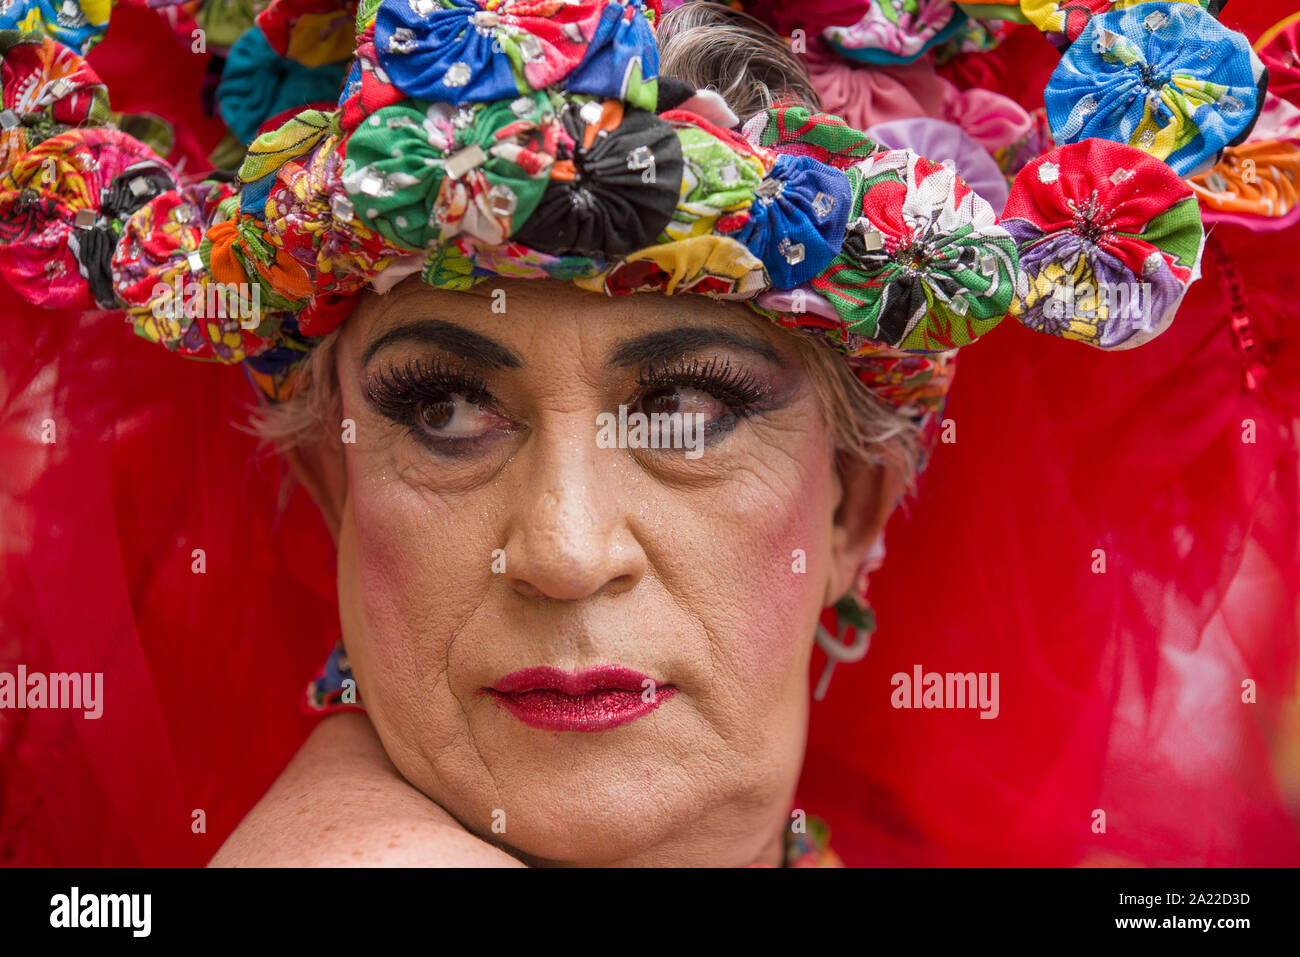 Brazilian Drag Queen wearing red dress and colorful garland Stock Photo